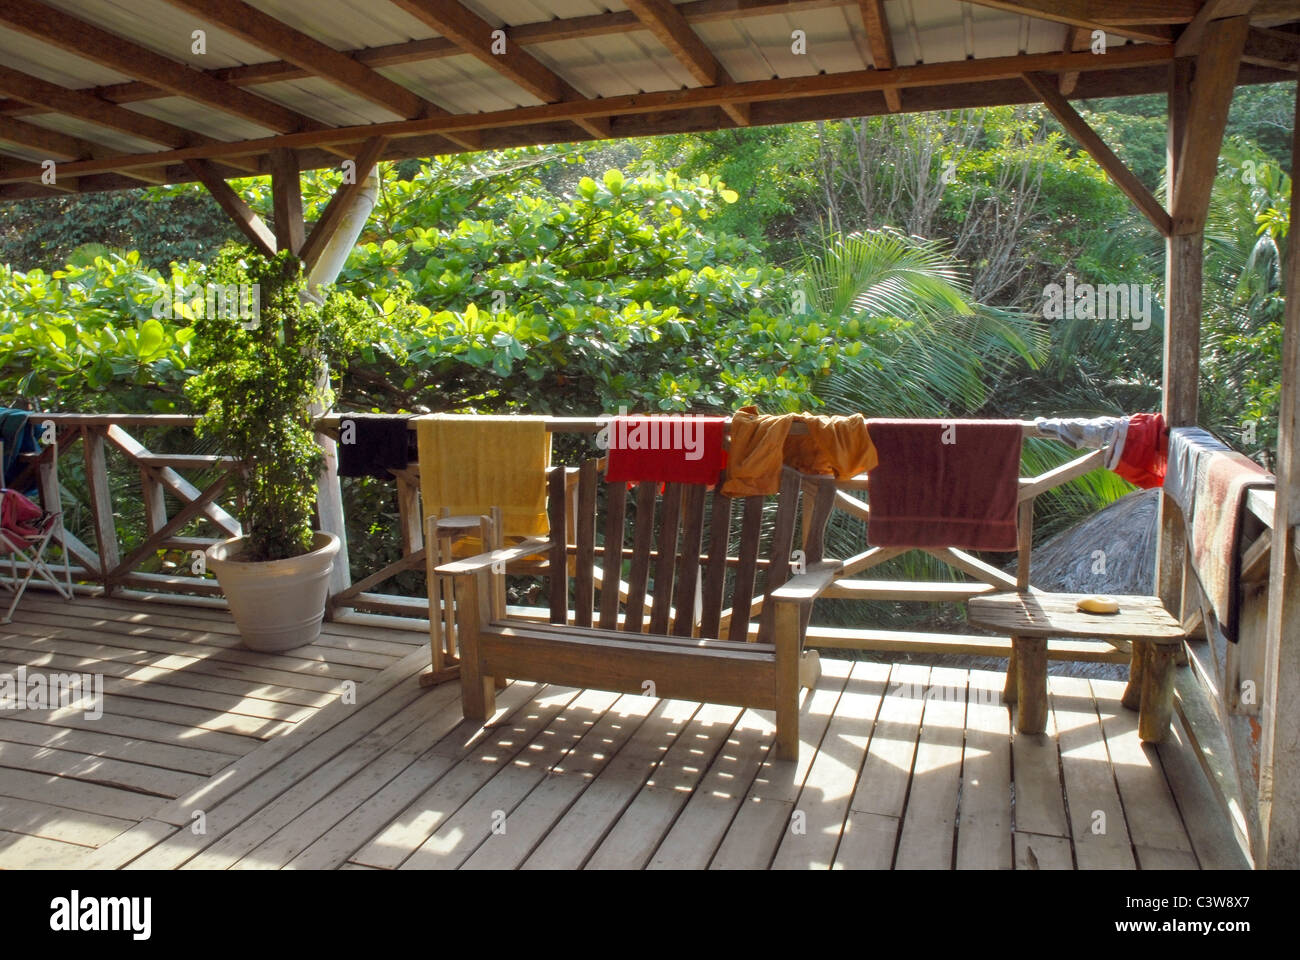 Wooden deck with clothes hanging from the railing. Rustic style. Vegetation on the background Stock Photo